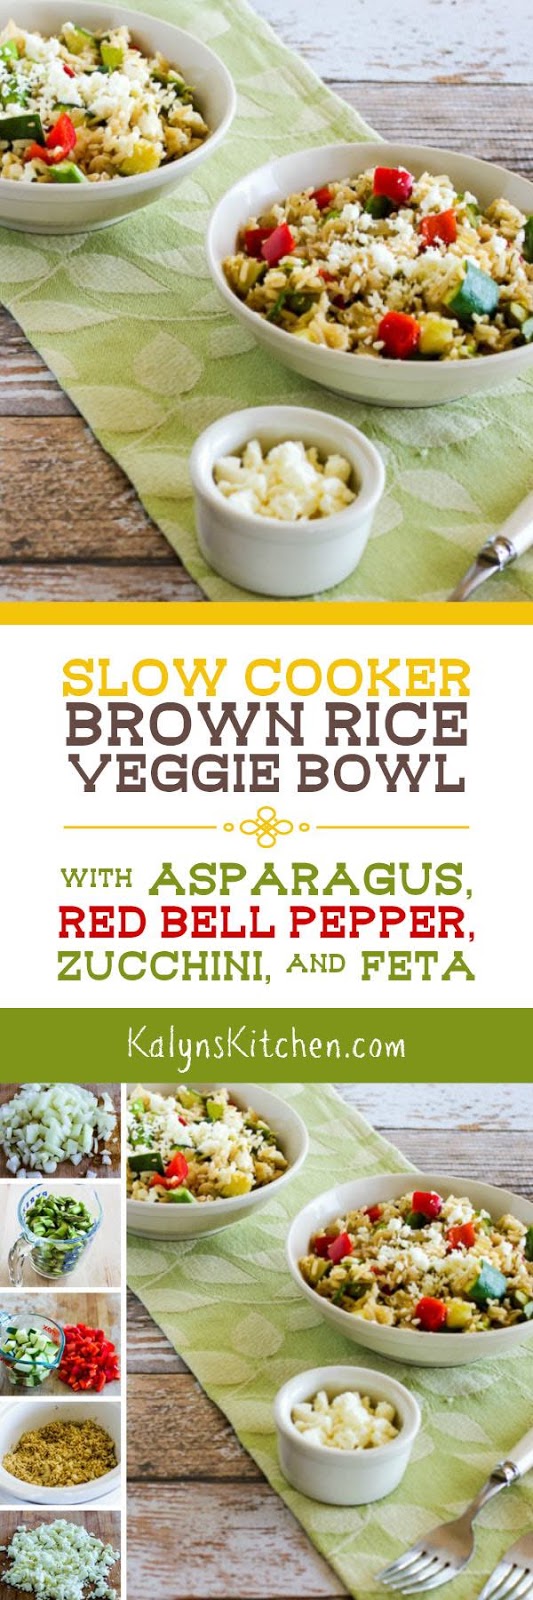 Slow Cooker Brown Rice Veggie Bowl with Asparagus, Red Bell Pepper ...